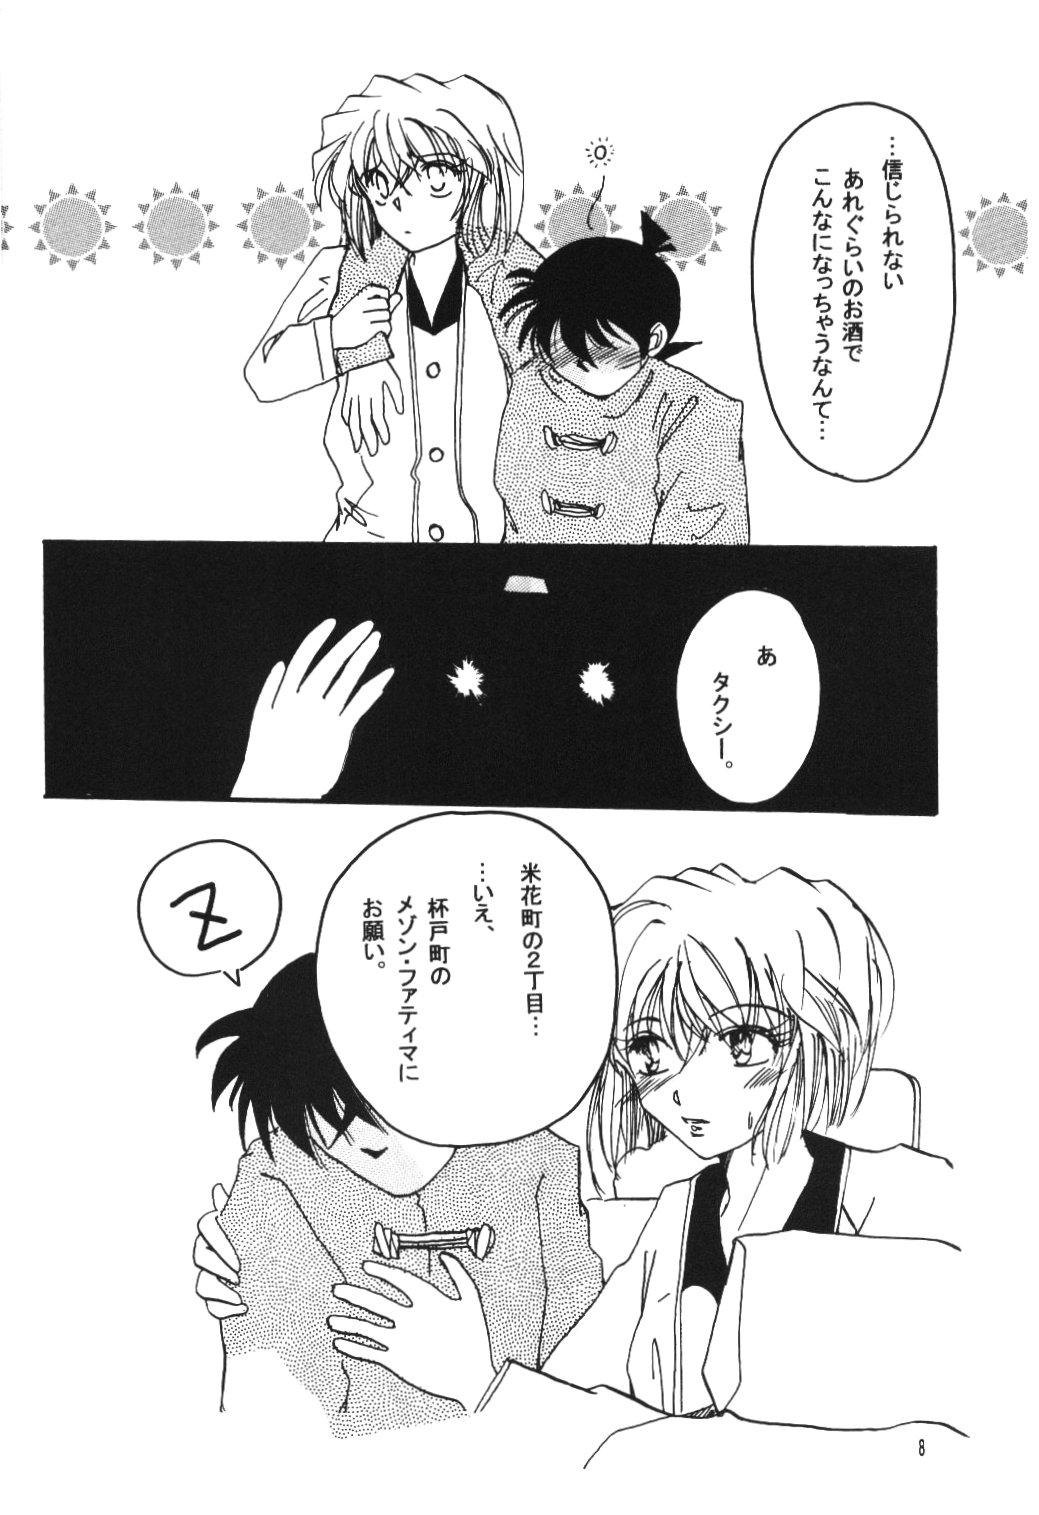 Toy Over Drive - Detective conan Mistress - Page 7